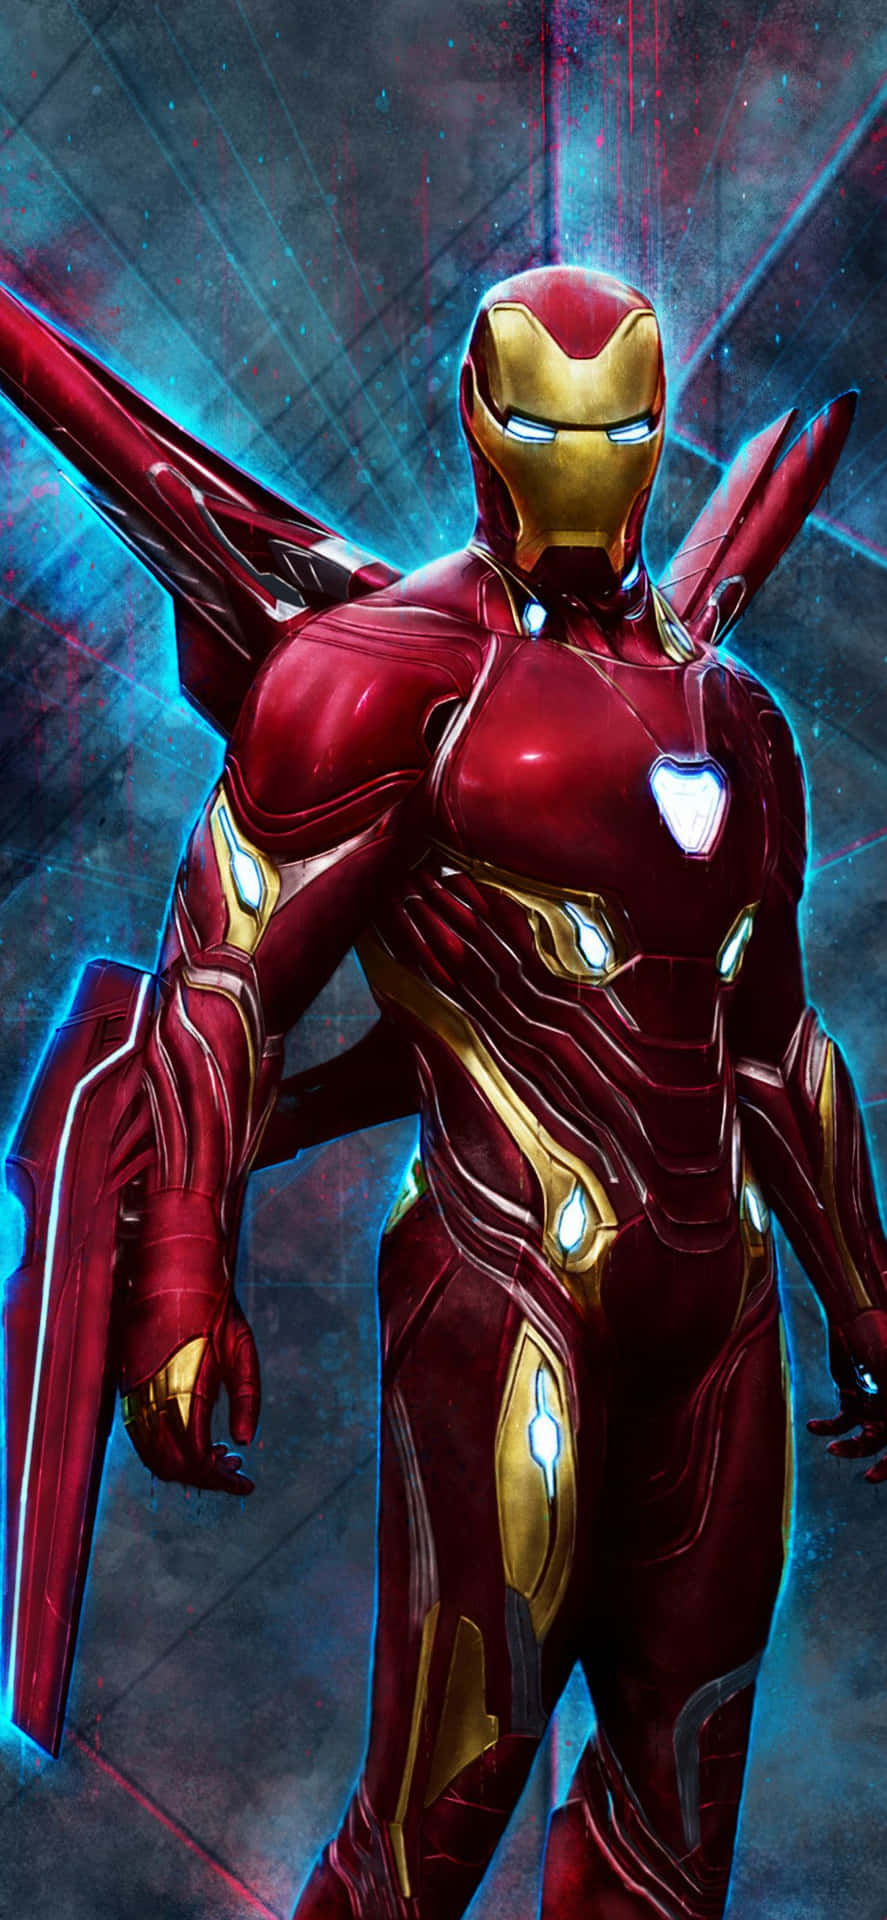 Unleash The Power Of Iron Man With the Iphone X Wallpaper